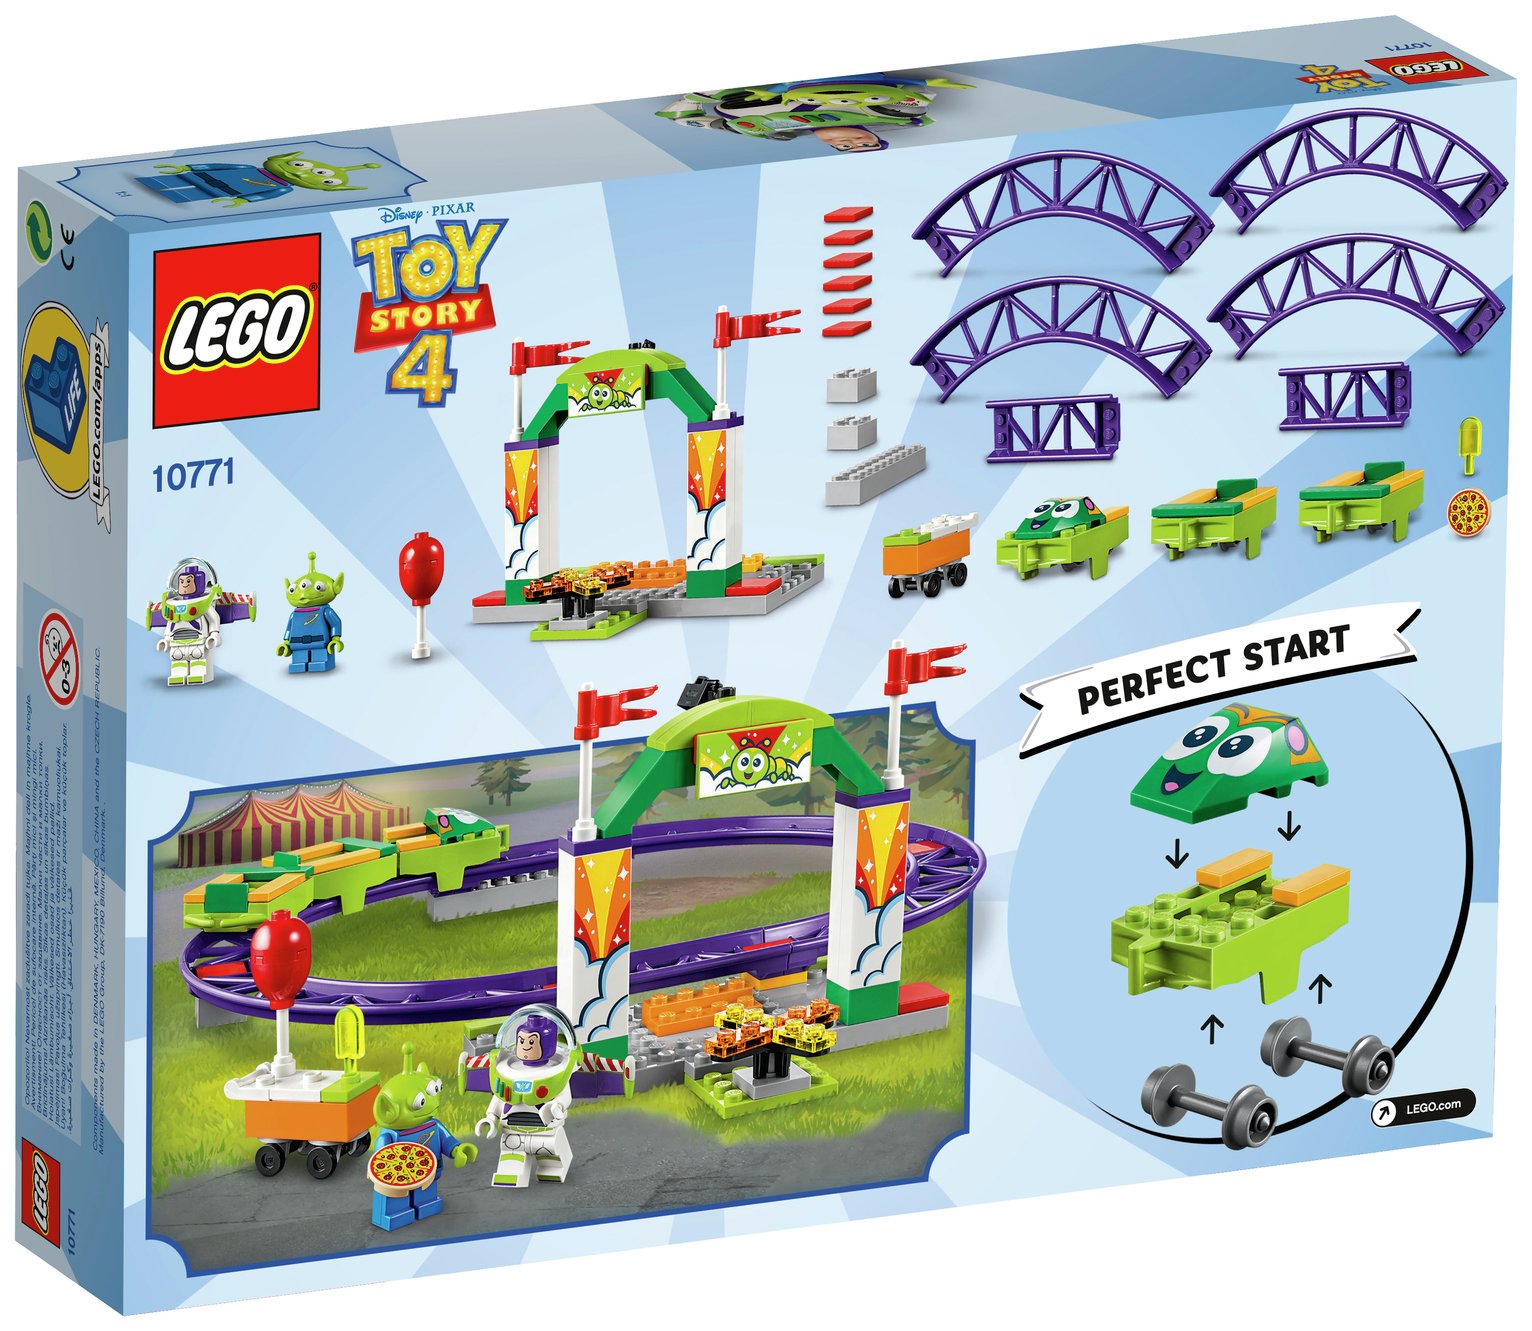 LEGO Toy Story 4 Rollercoaster Playset Review